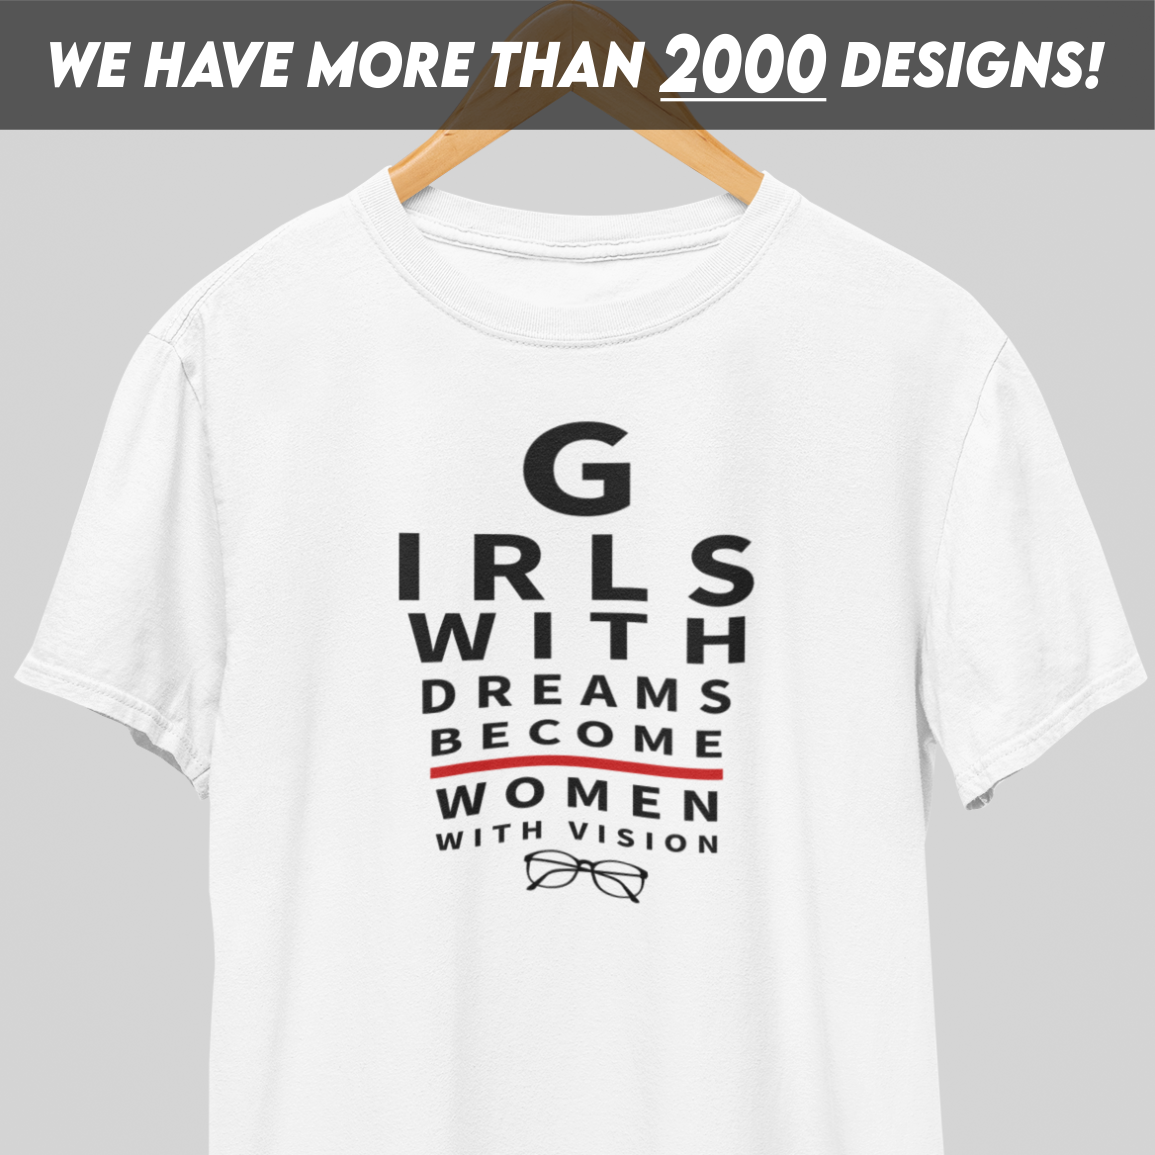 Girls With Dreams T-Shirt